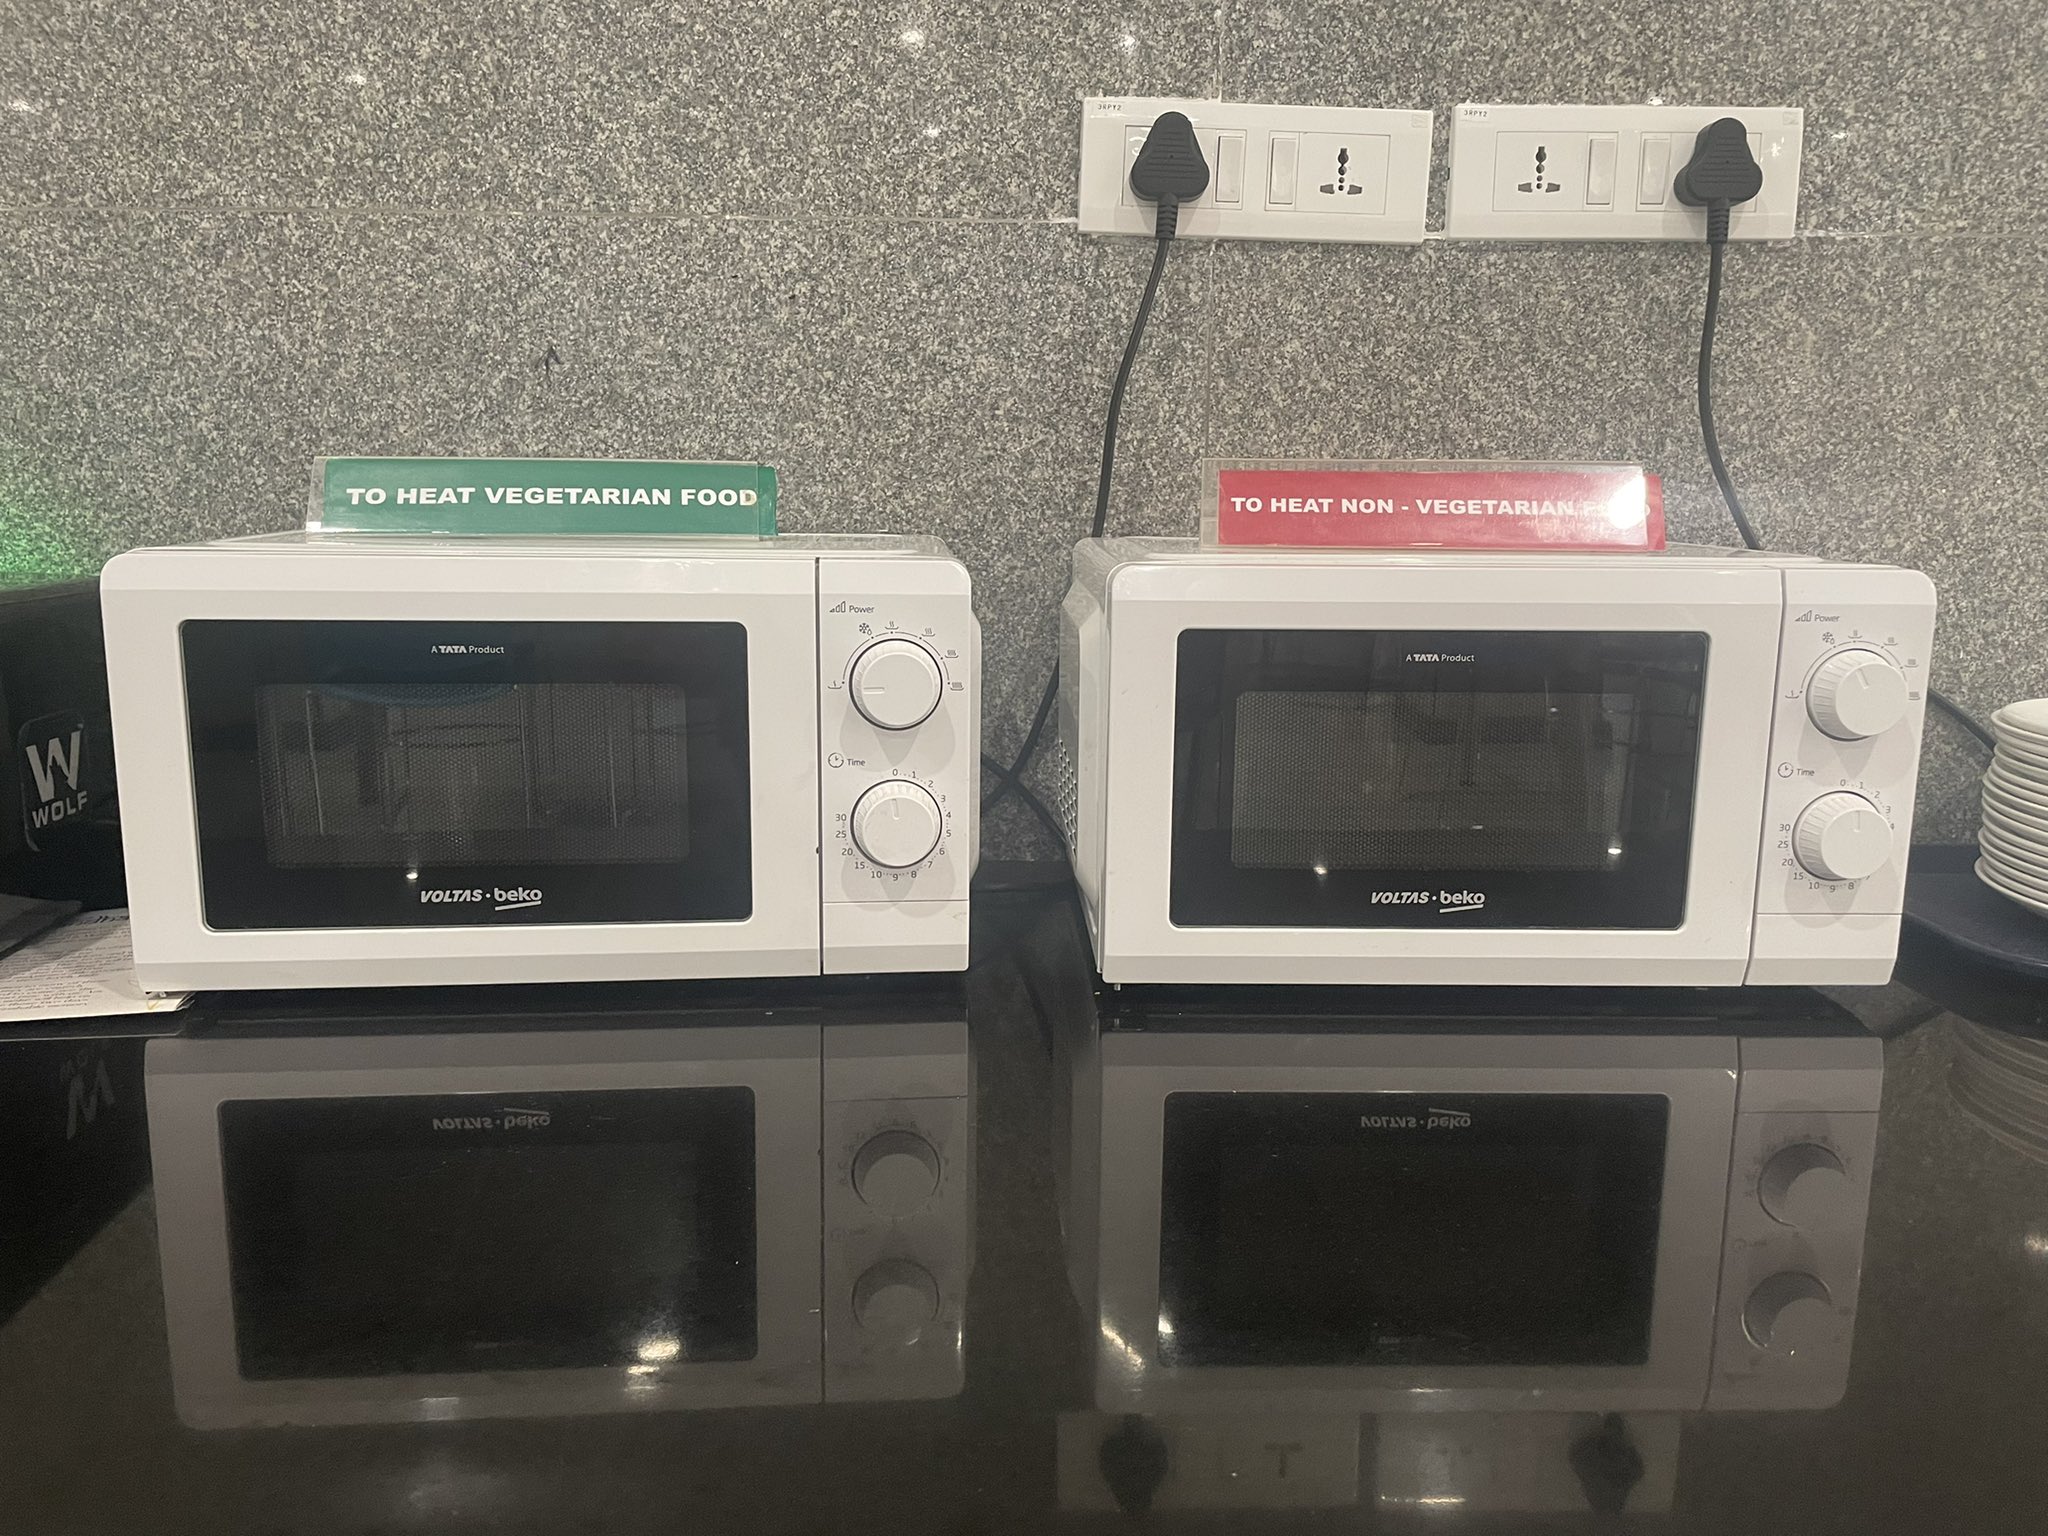 Two identical microwaves, one labelled "To heat vegetarian food" and the other "To heat non-vegetarian food"